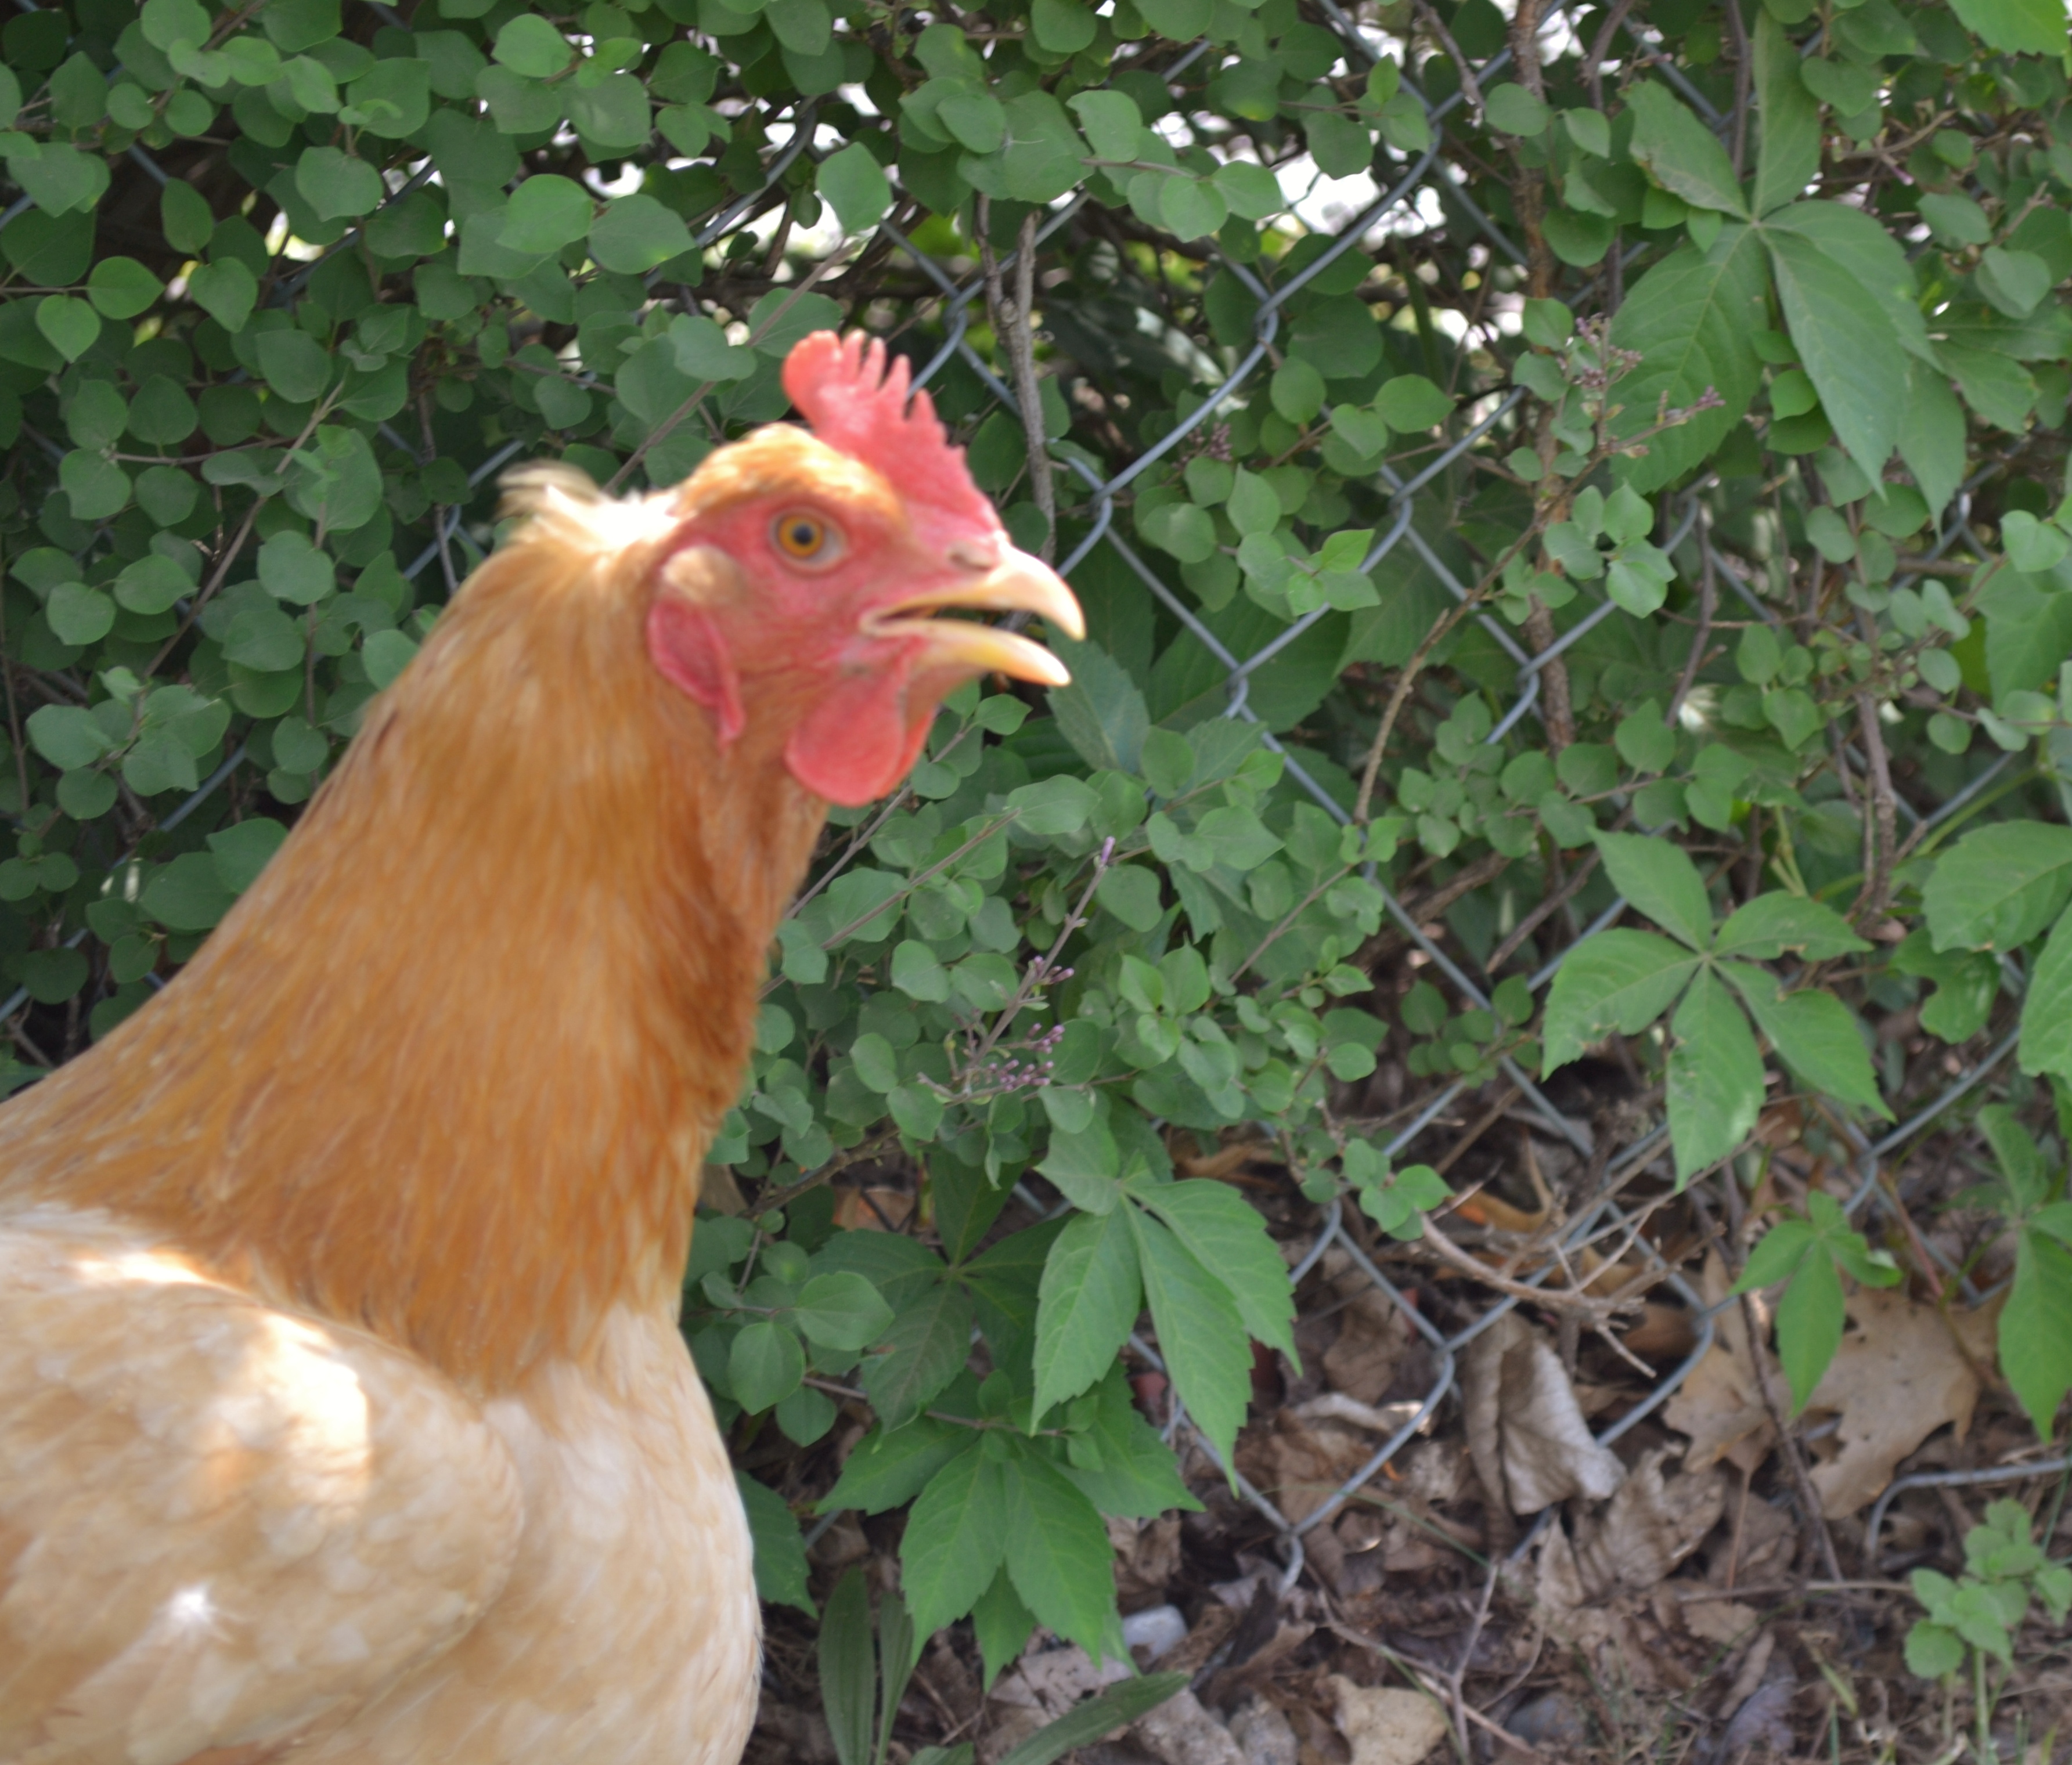 Lady Madonna, one of our new chickens